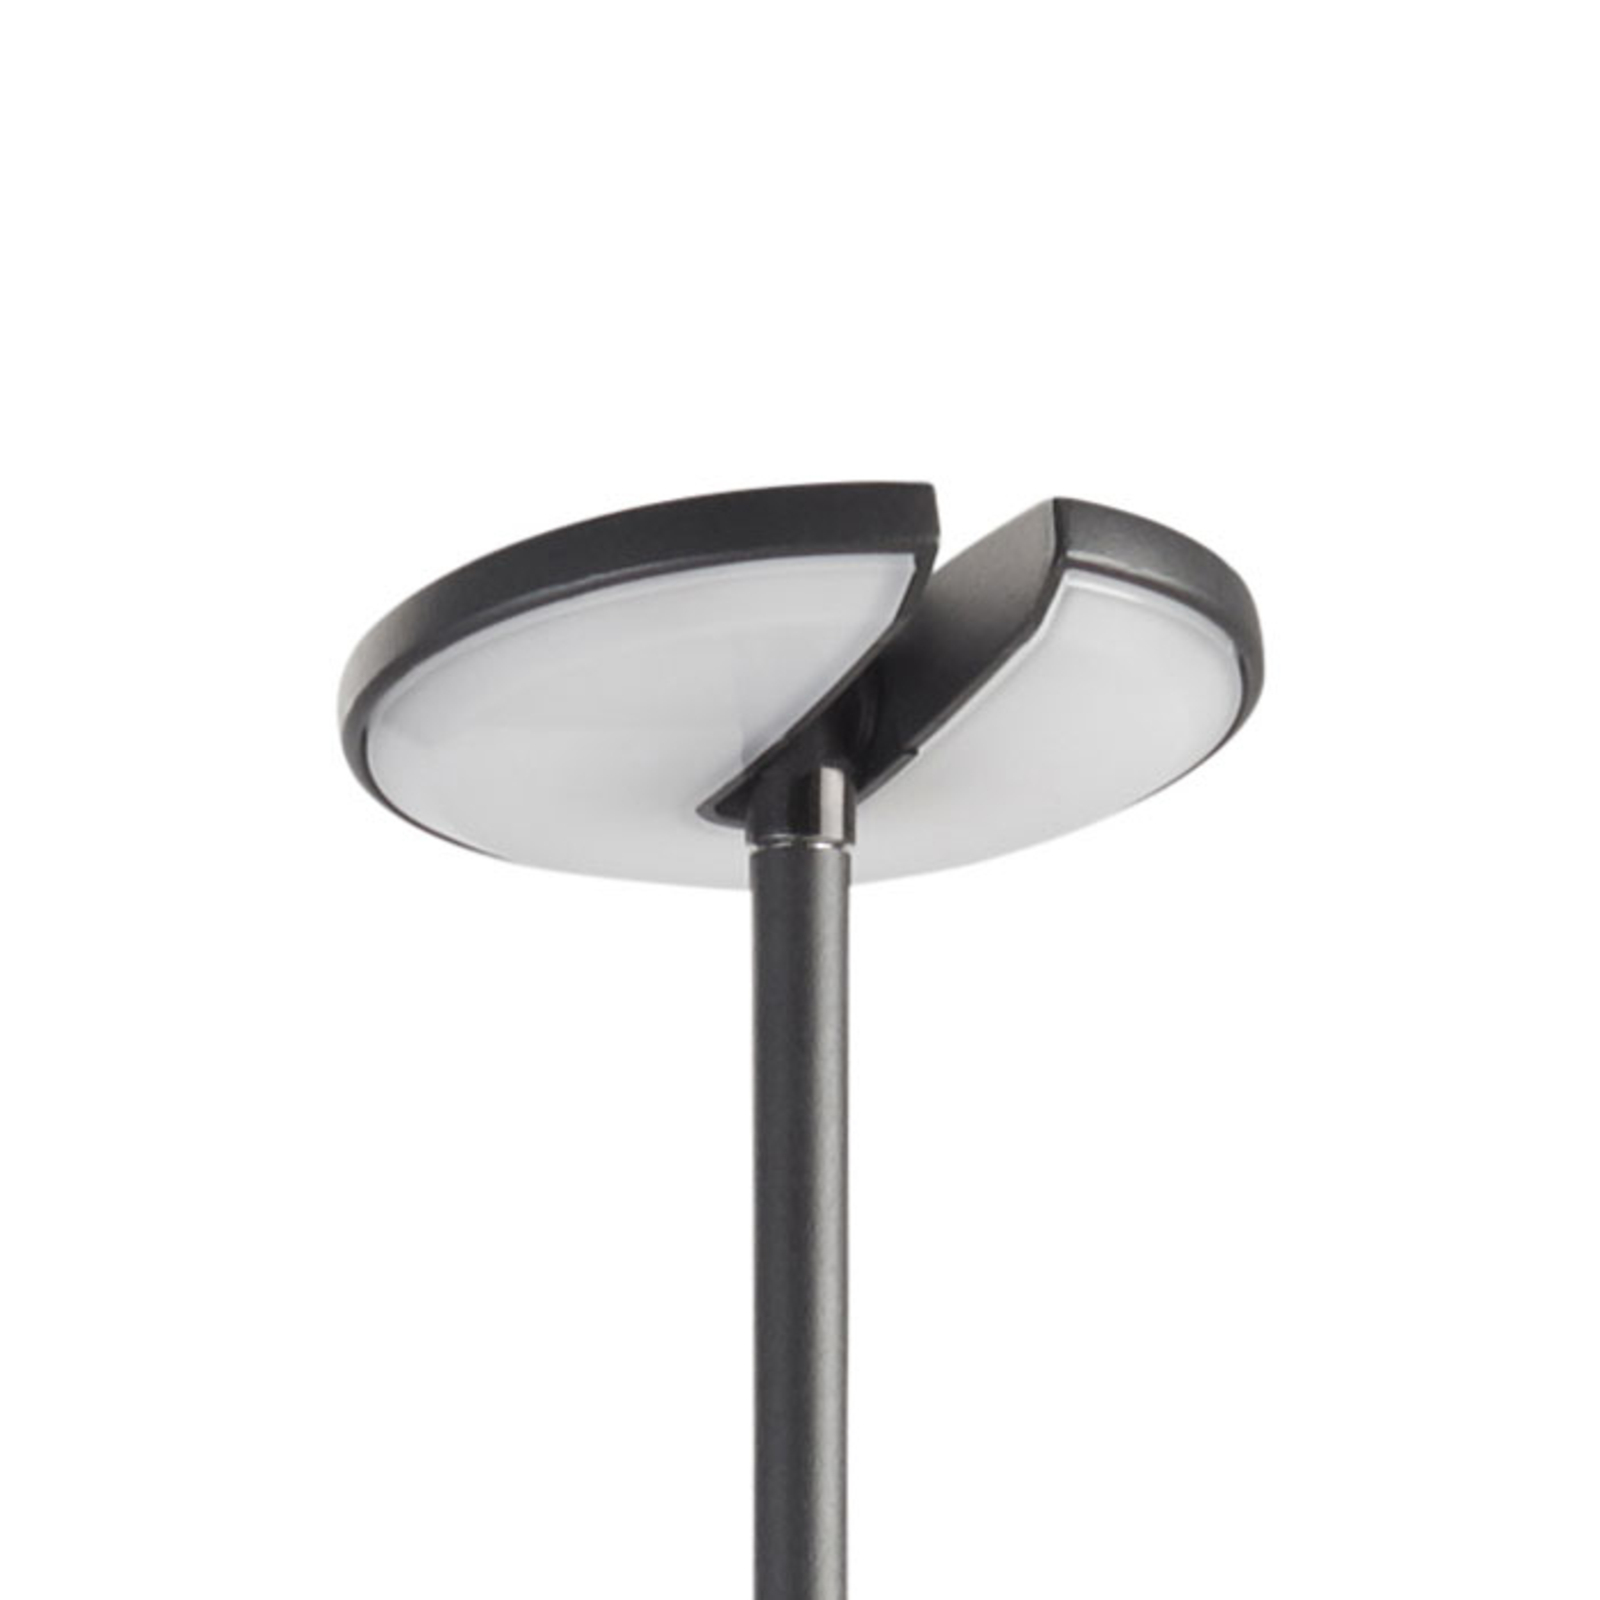 LED Invisible LED bollard light with ground spike